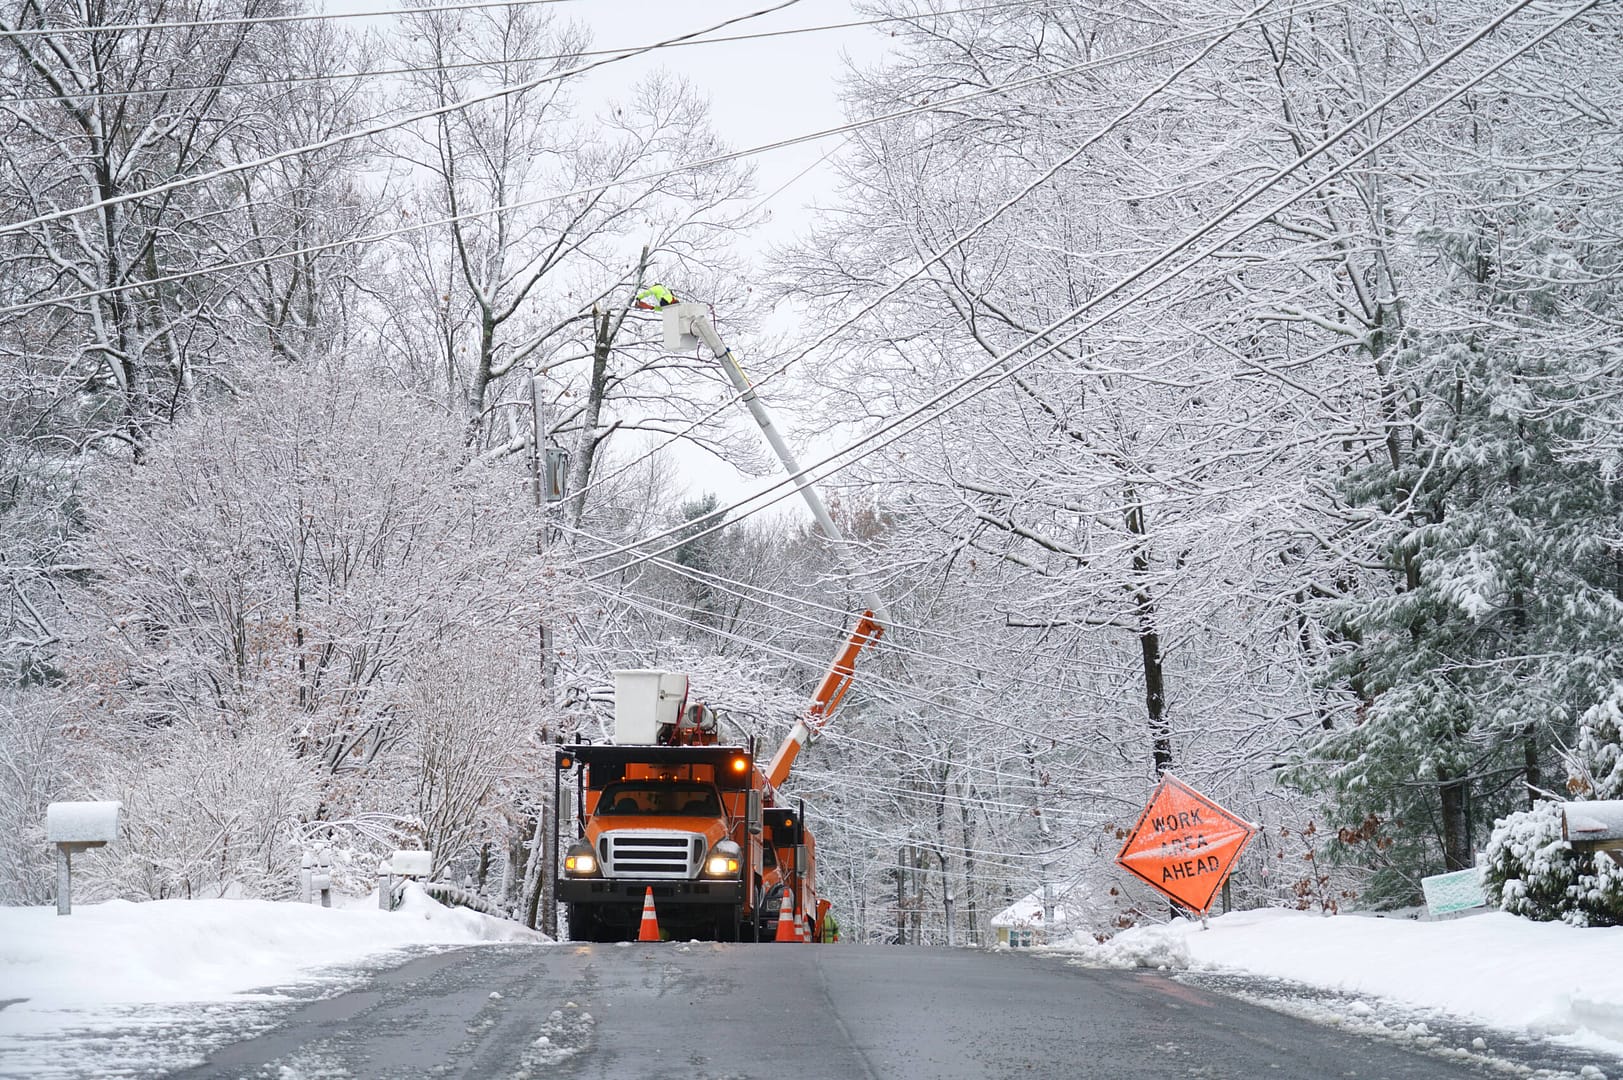 A utility worker clearing an above-ground powerline line after a winter storm in Township, NJ.